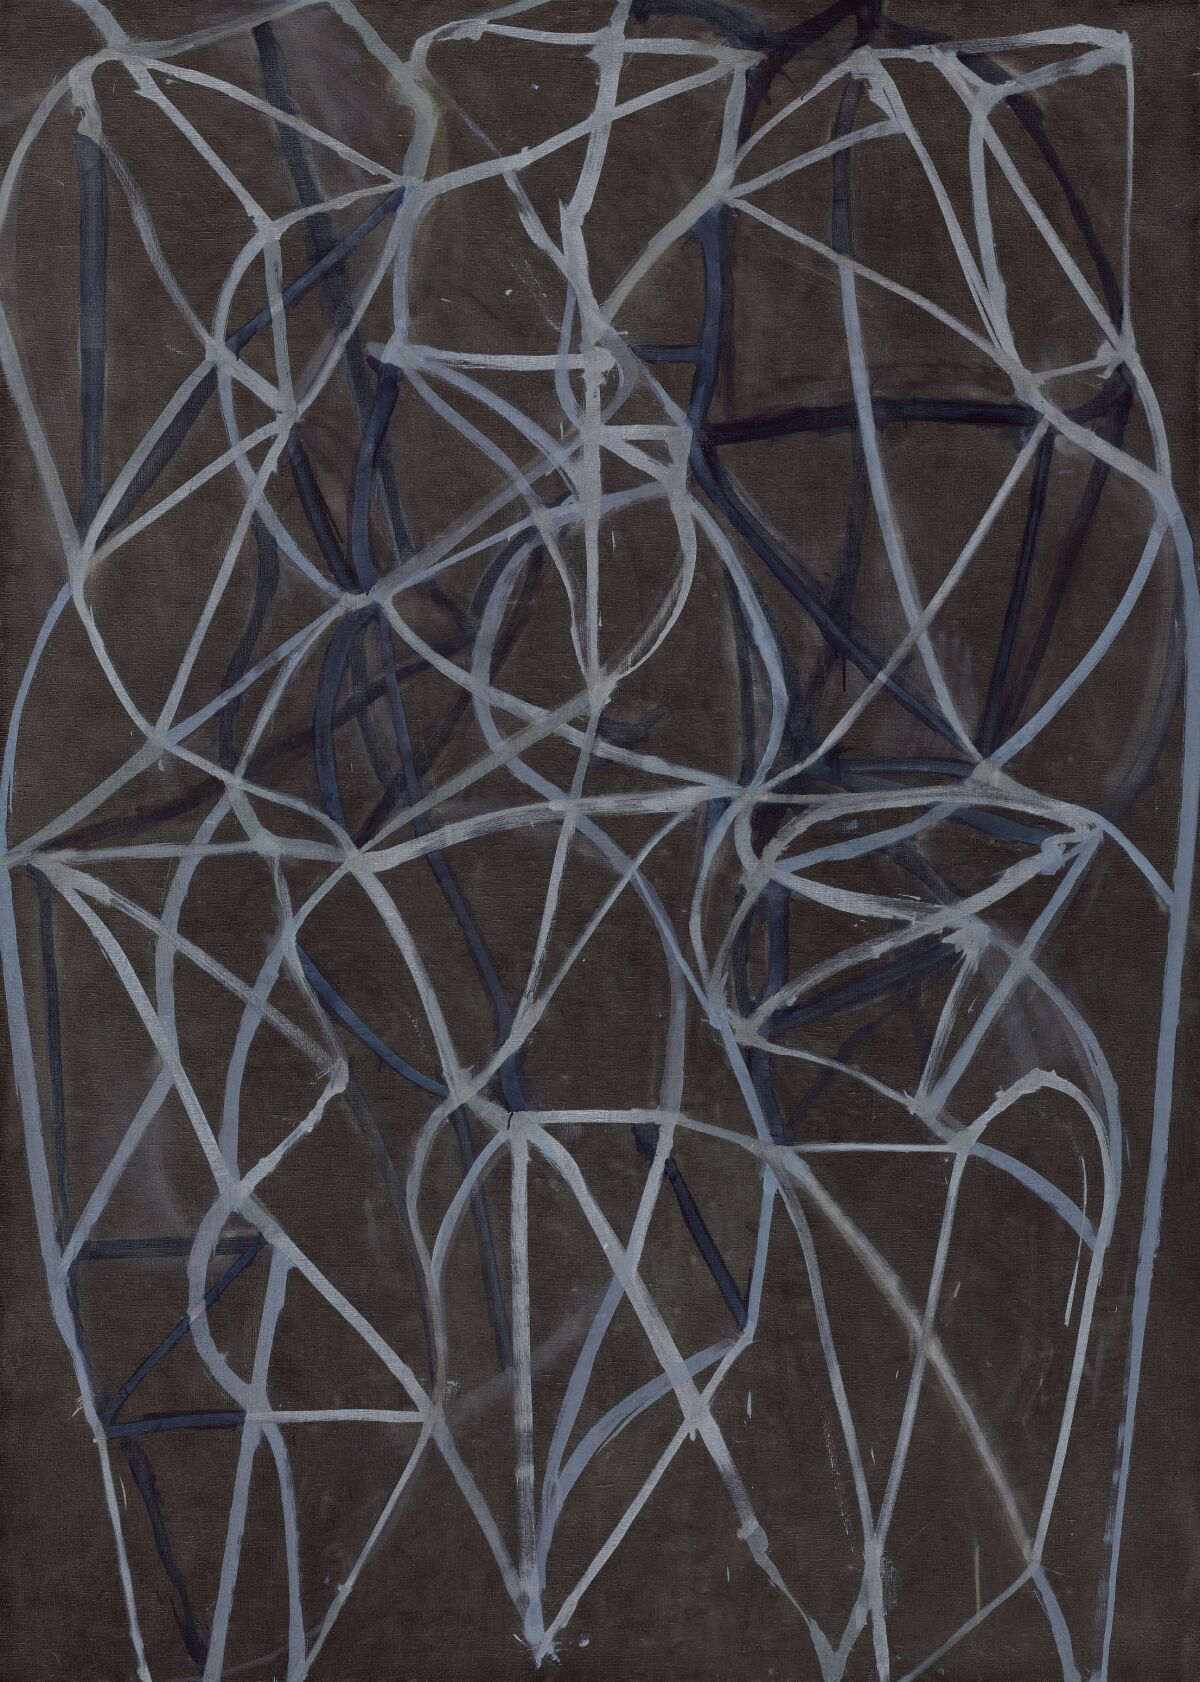 Brice Marden's "3," 1987-88, is one of three works being auctioned.